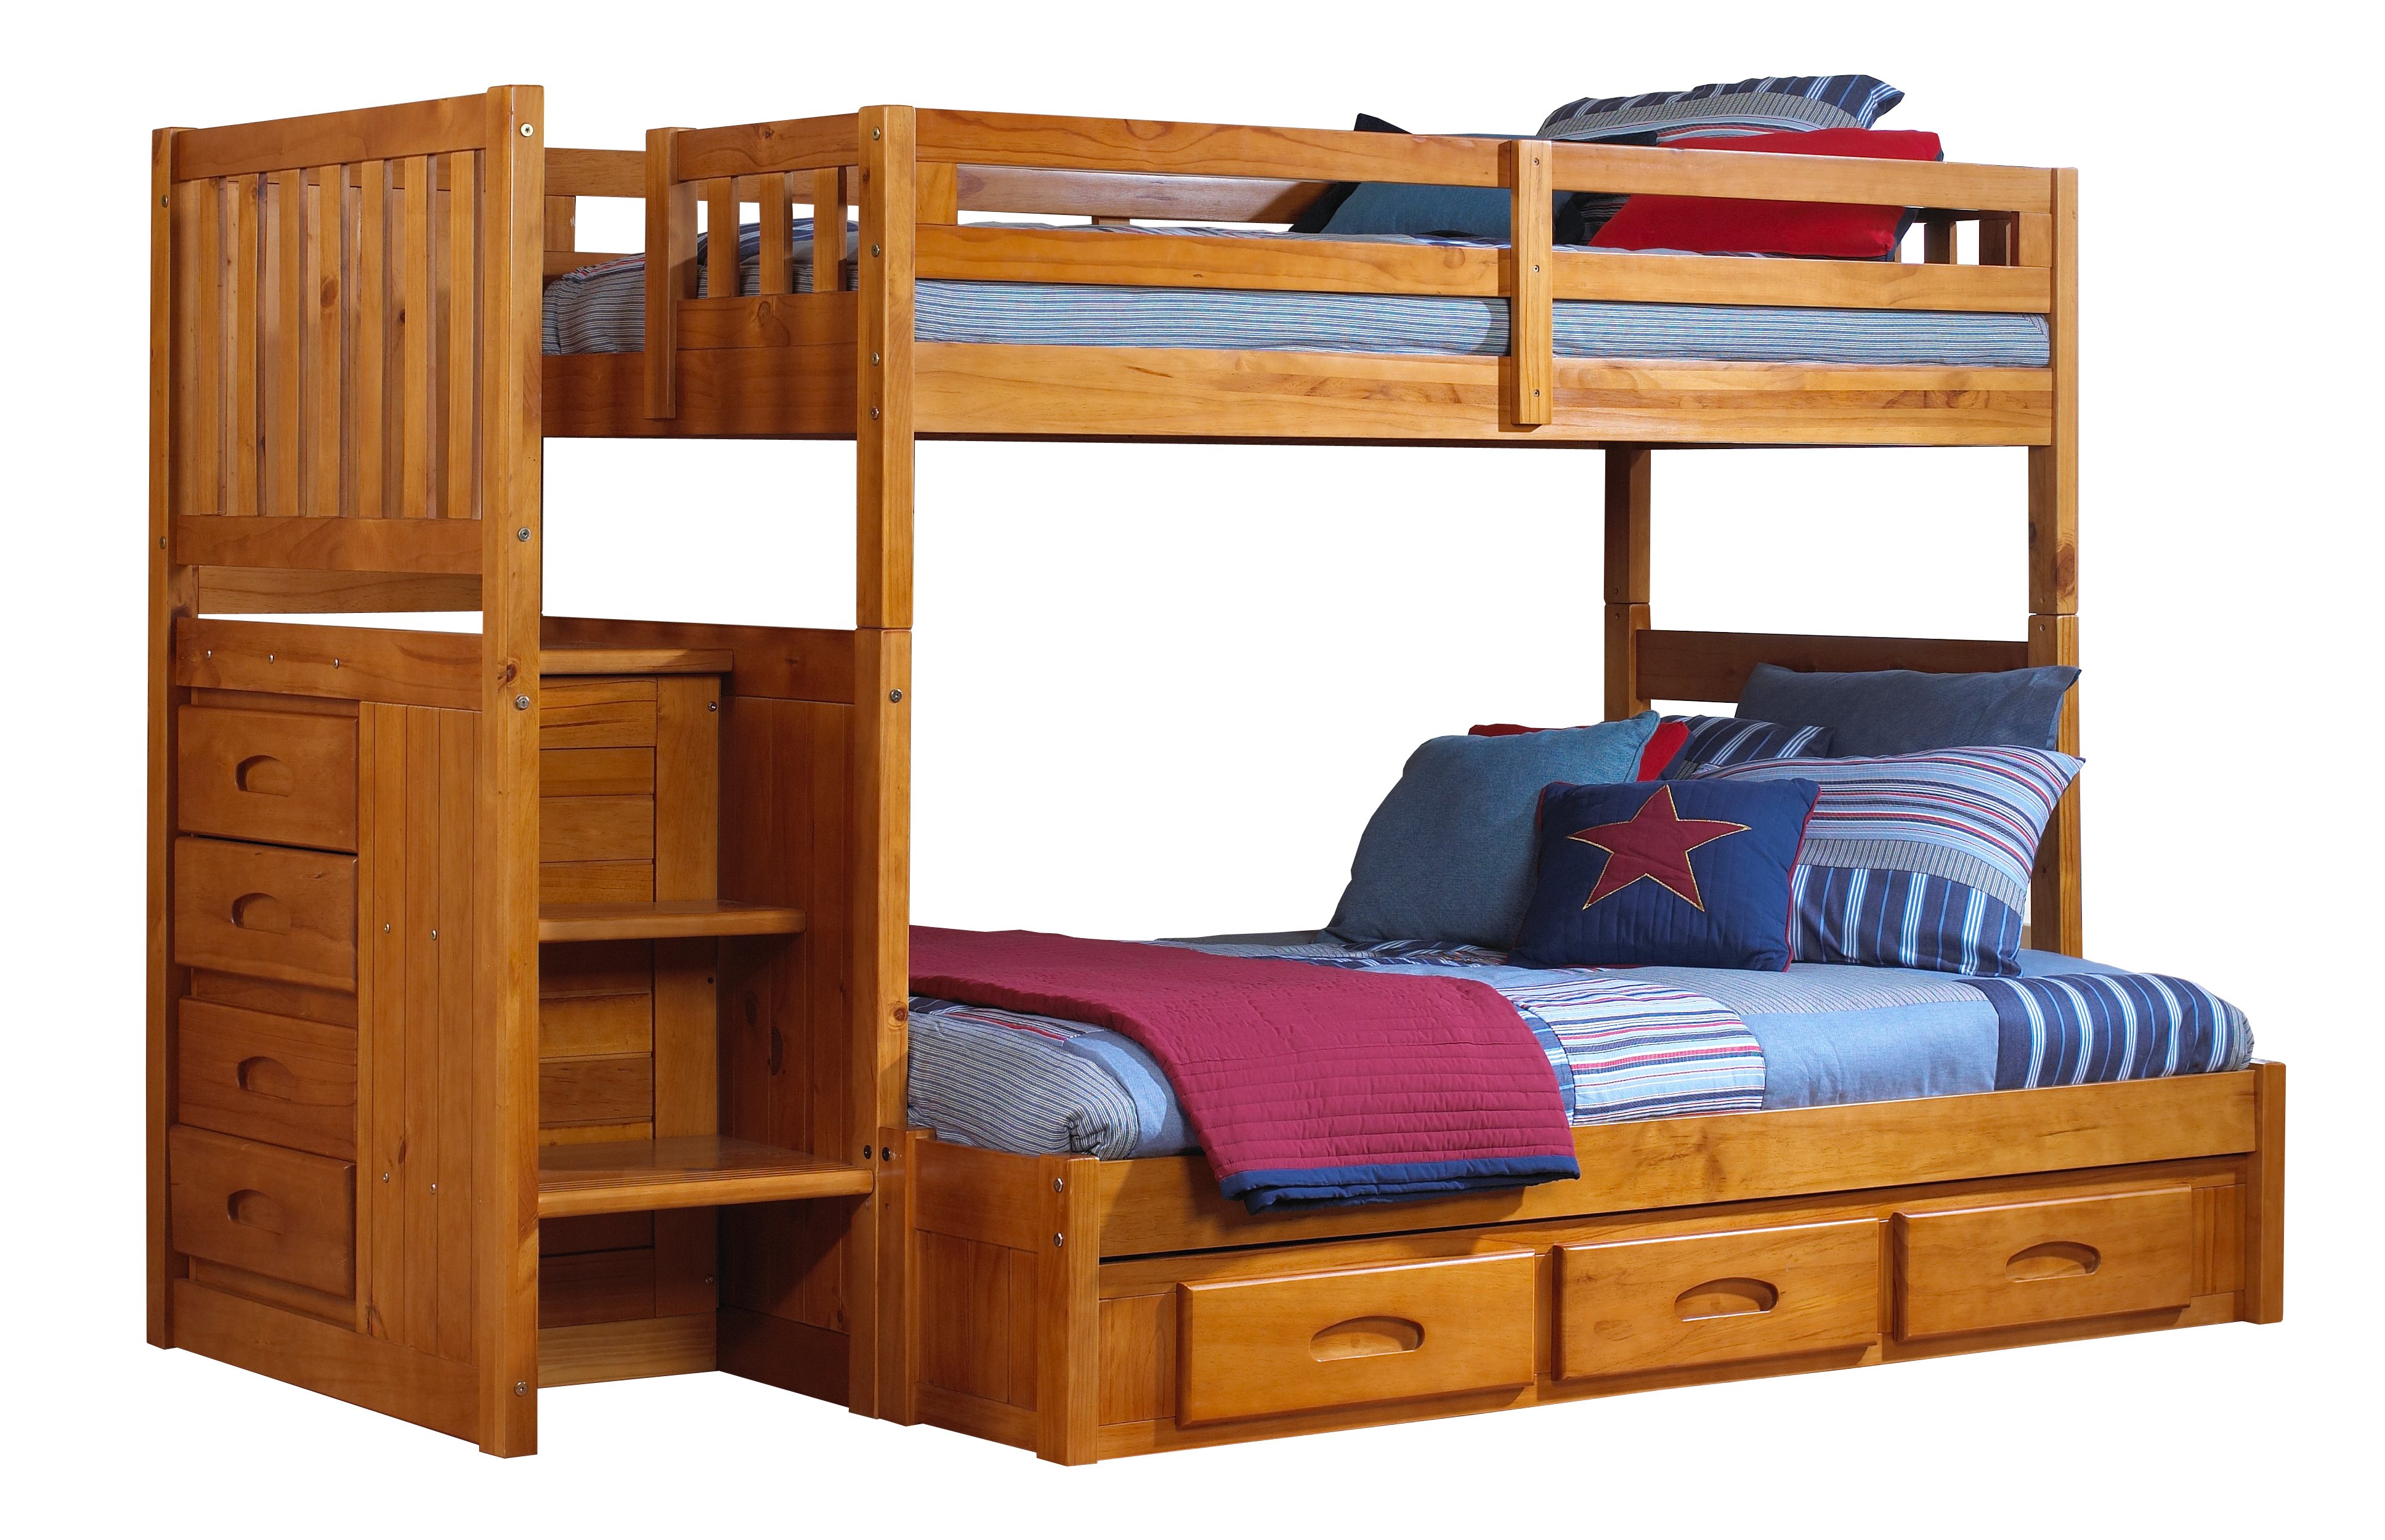 Honey Staircase Bunk Bed, All Wood Bunk Beds